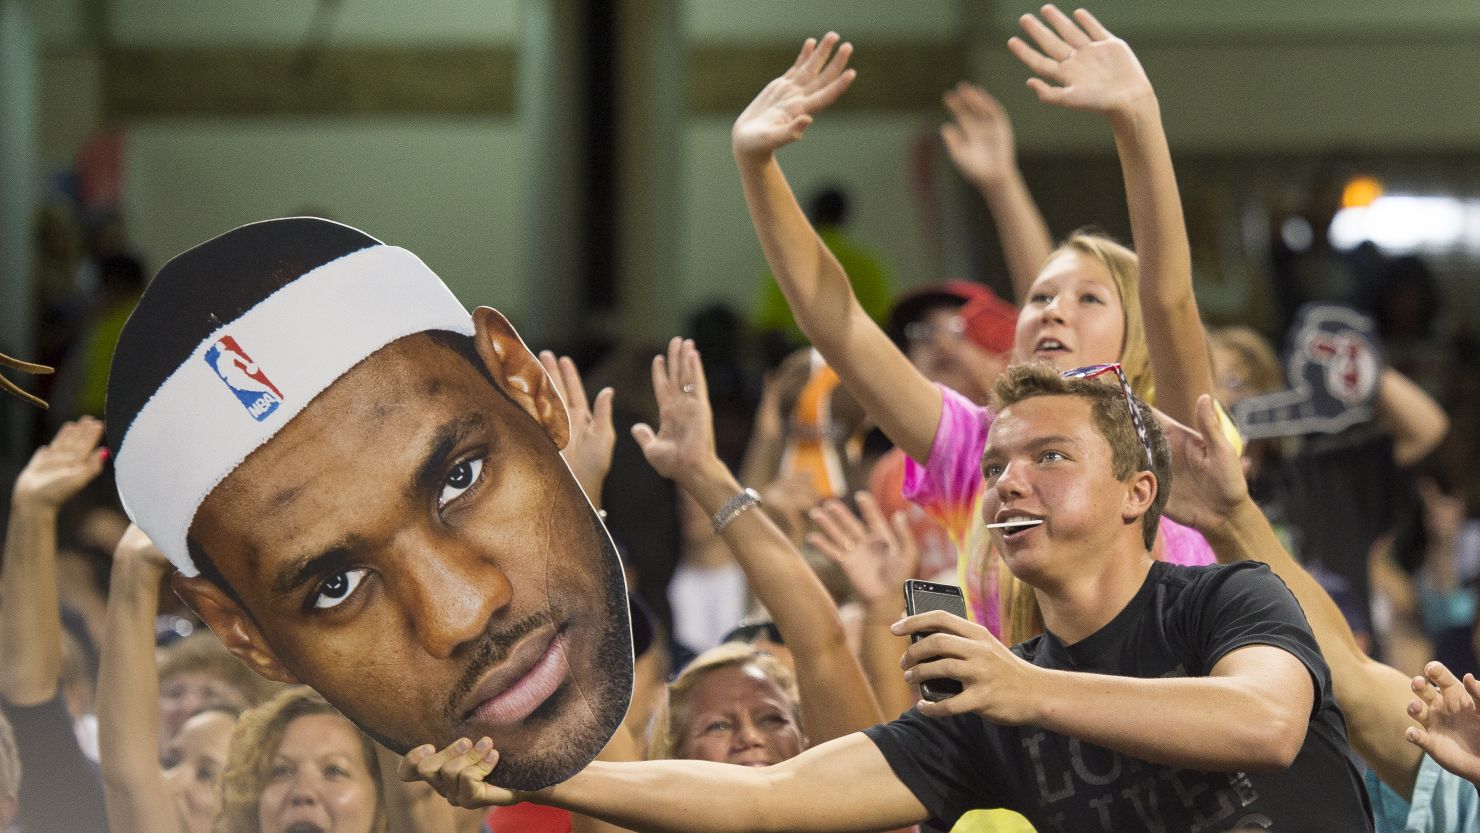 LeBron James's return to the NBA's Cleveland Cavaliers has provoked widespread joy in the town.